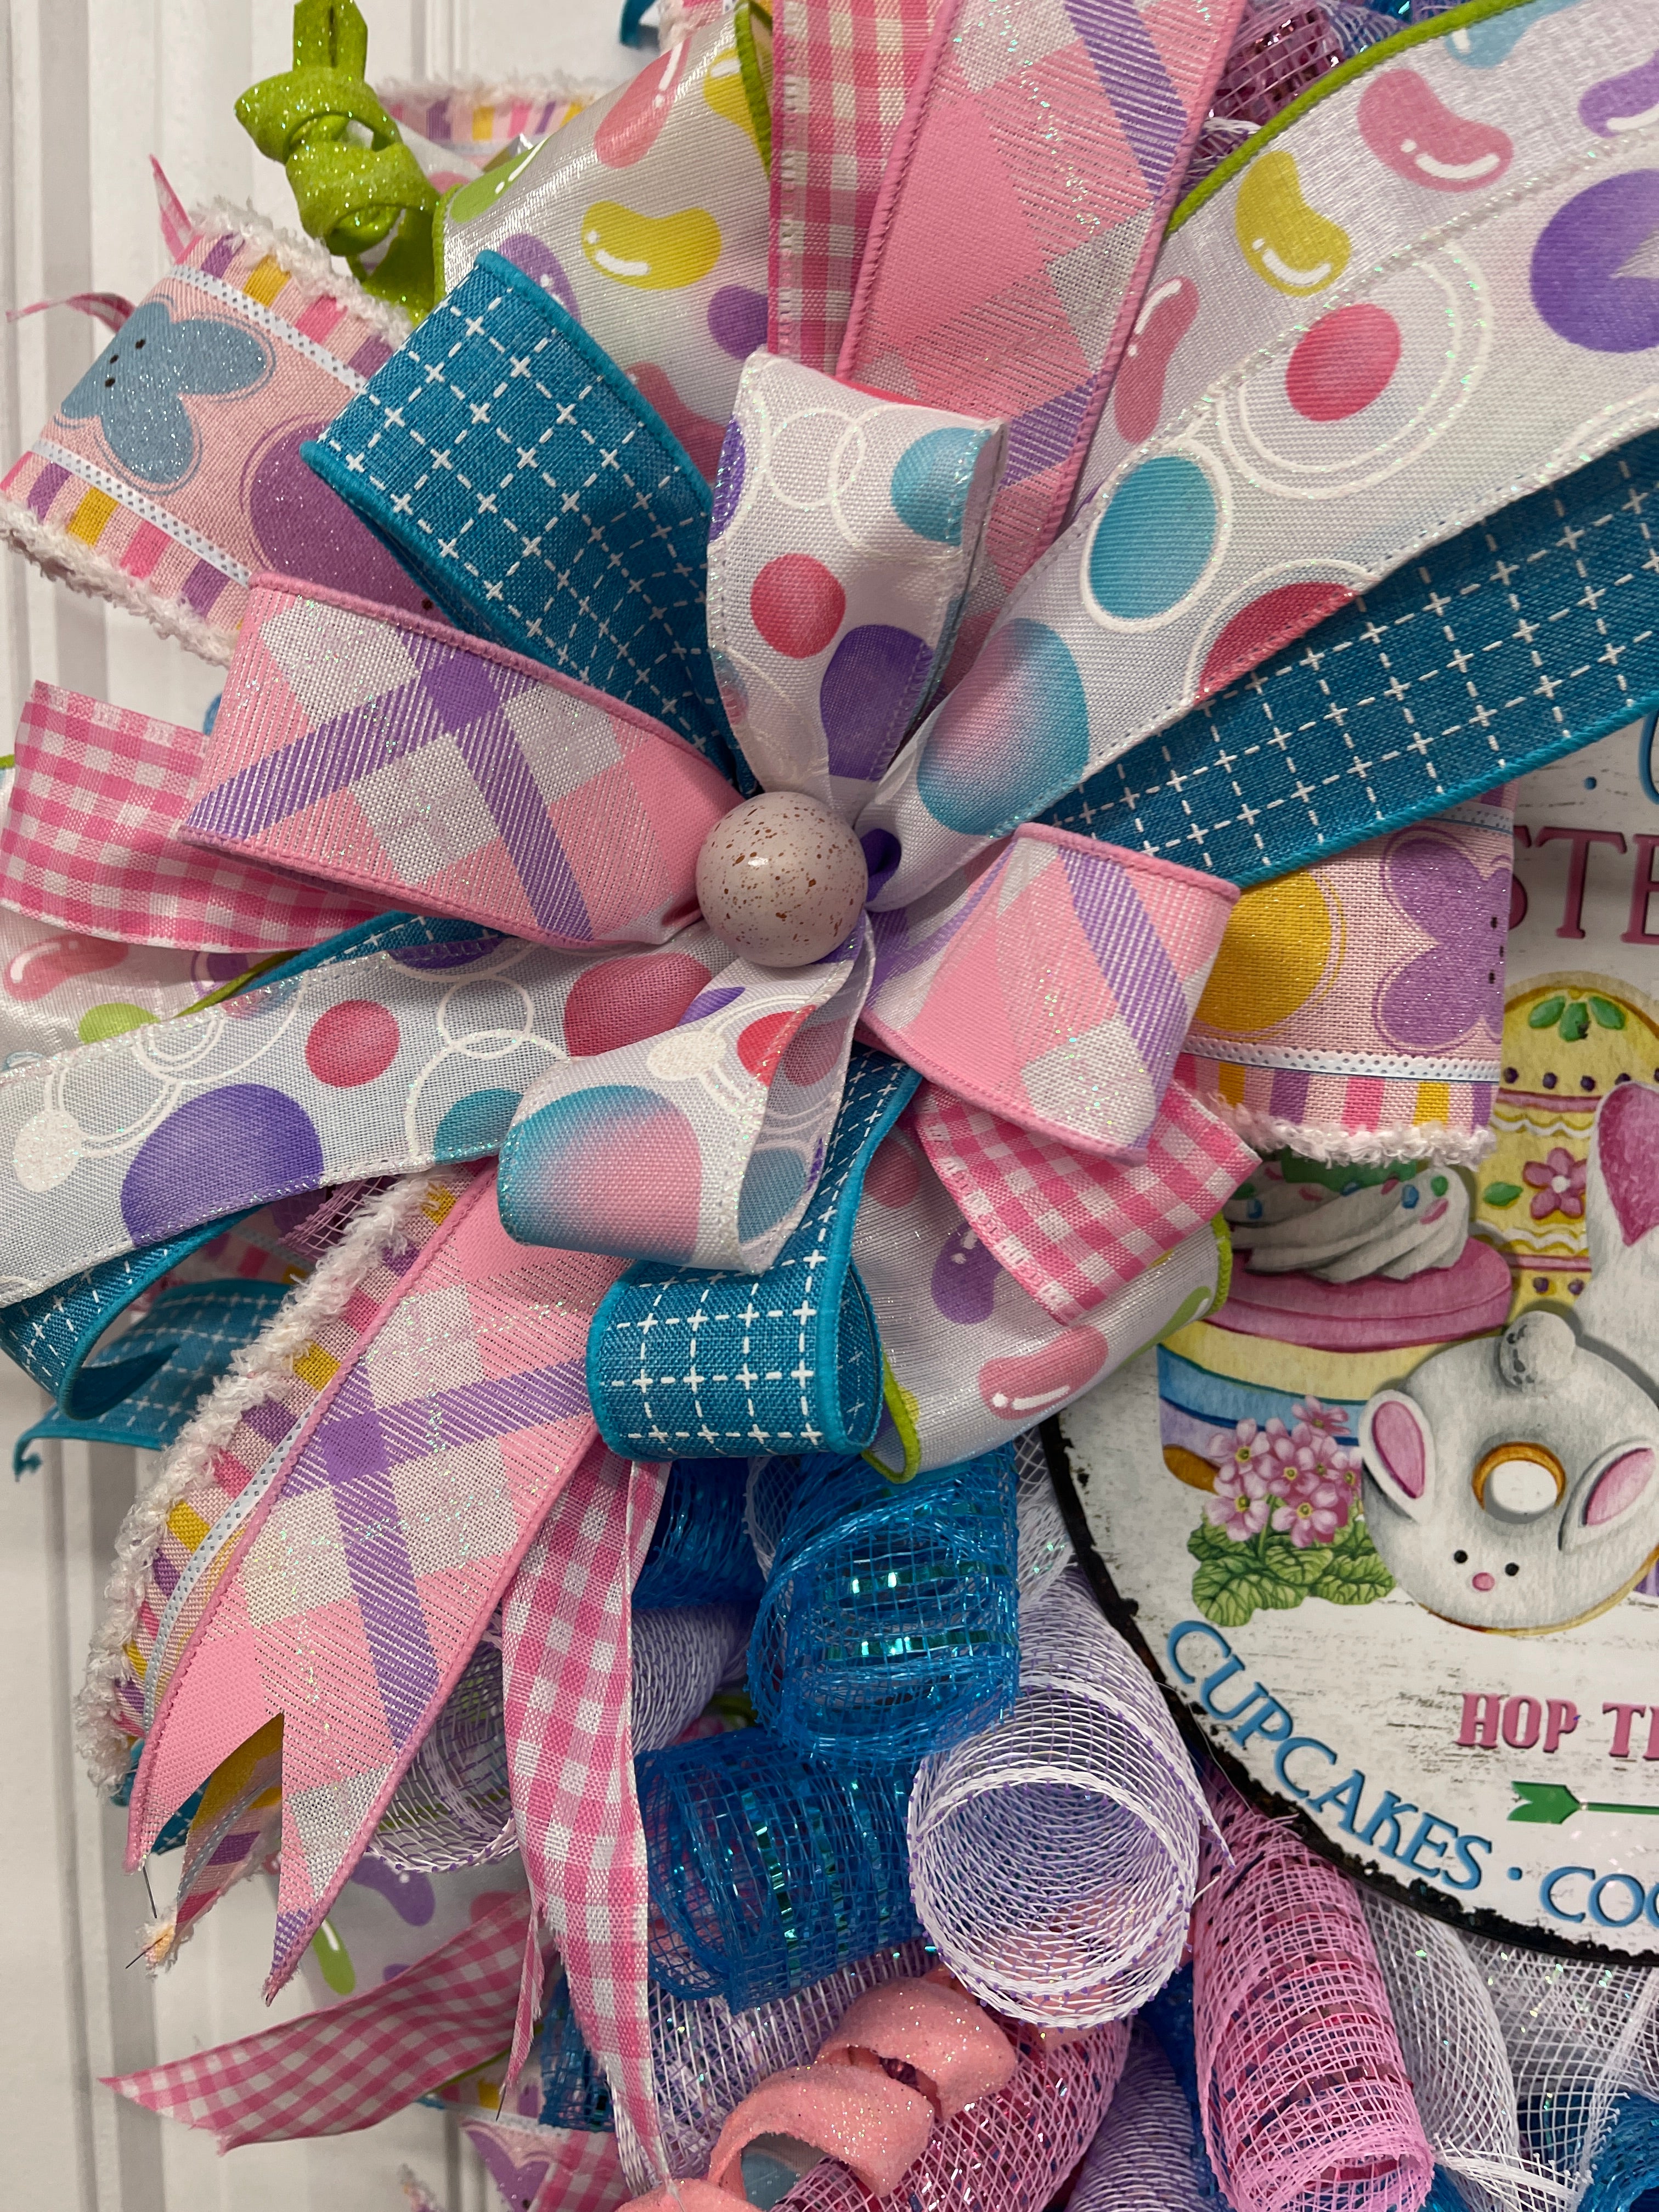 Close up of Bow on the wreath featuring Purple Speckled Egg in the center featuring Pink, Purple, Blue and White Ribbons